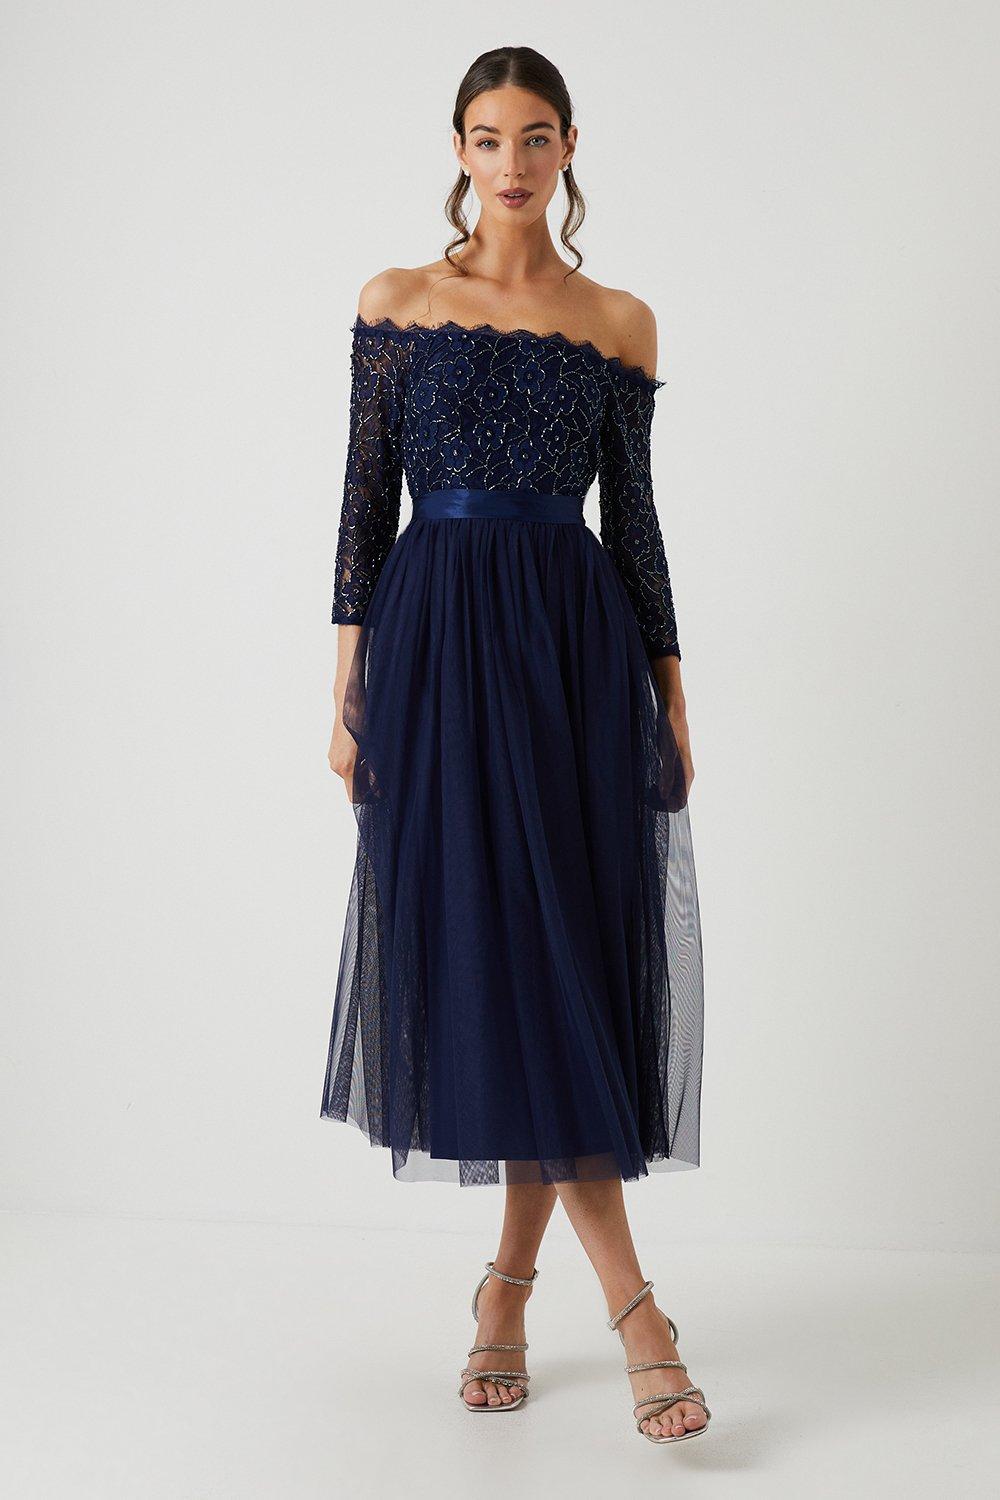 Embellished Lace Two In One Bardot Bridesmaids Dress - Navy